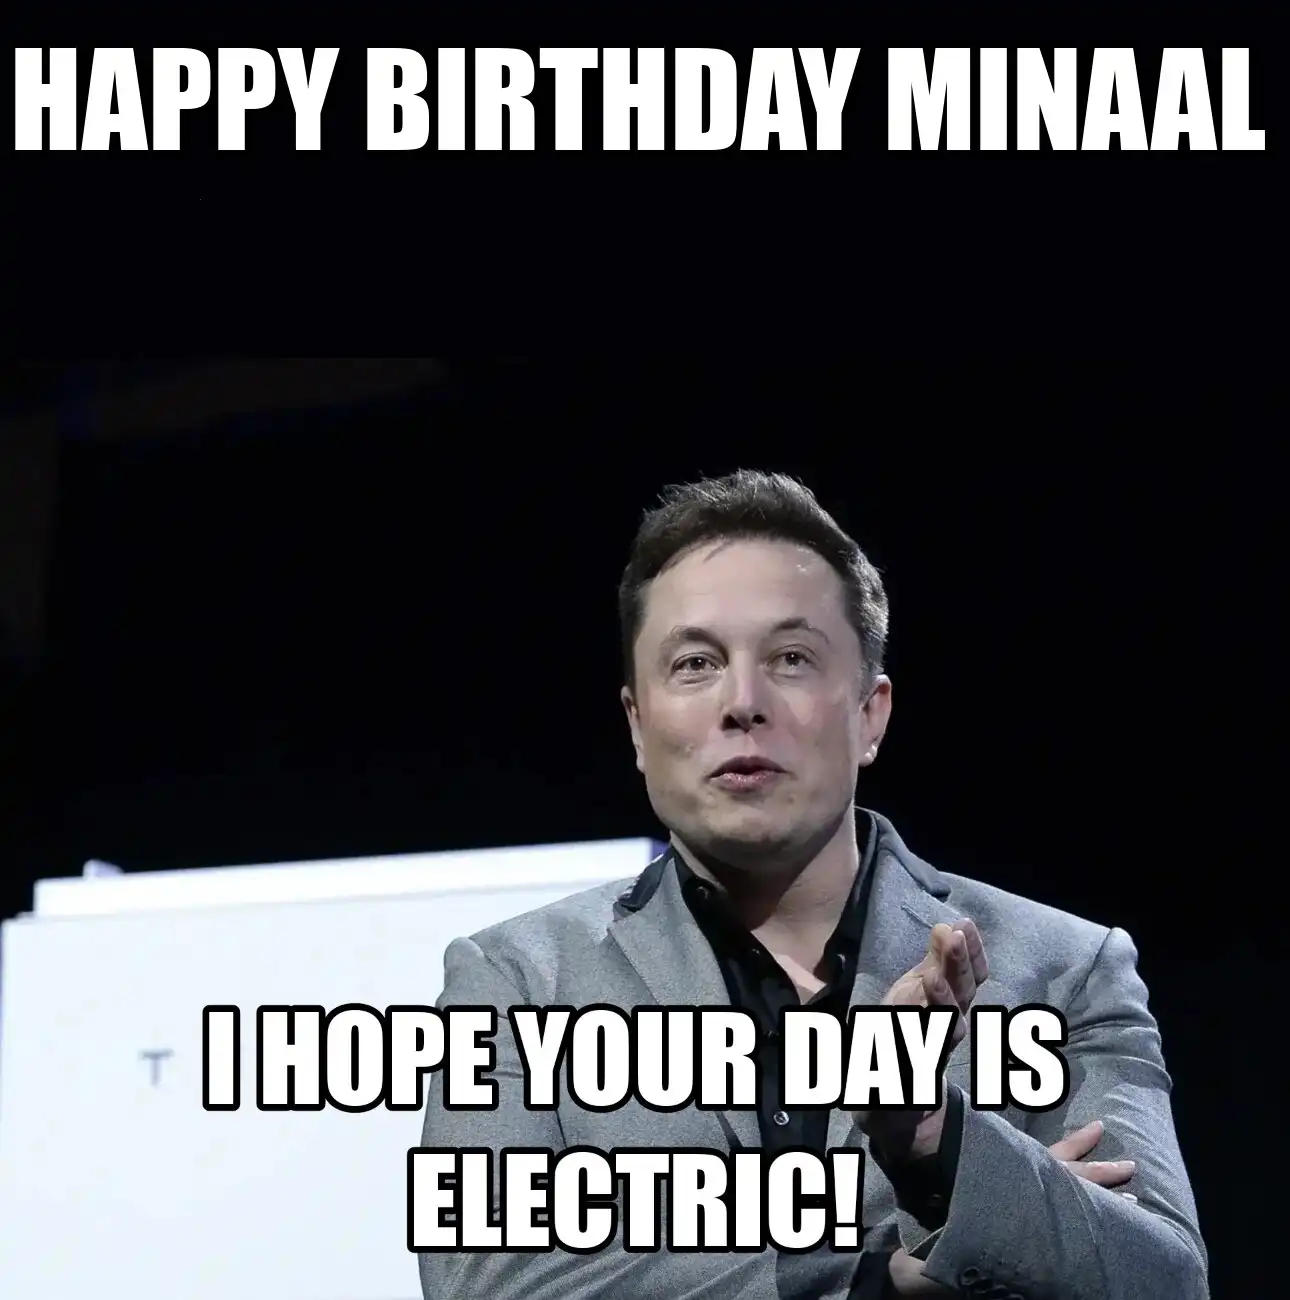 Happy Birthday Minaal I Hope Your Day Is Electric Meme